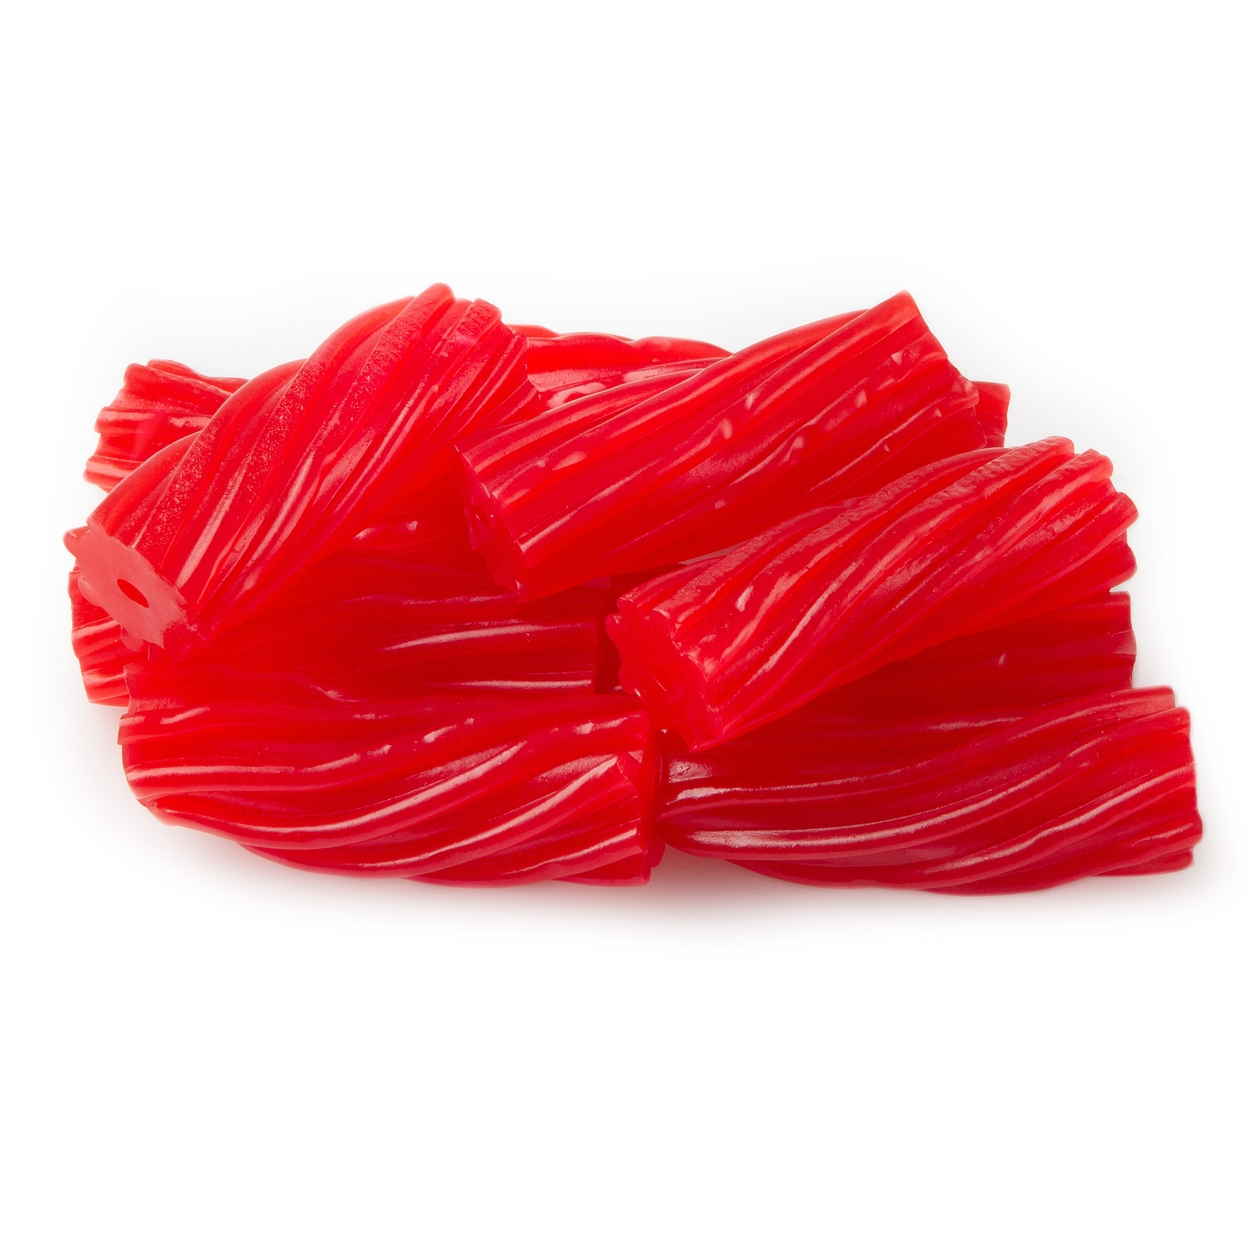 Finnish Sweet Licorice Strawberry Flavor - NY Spice Shop